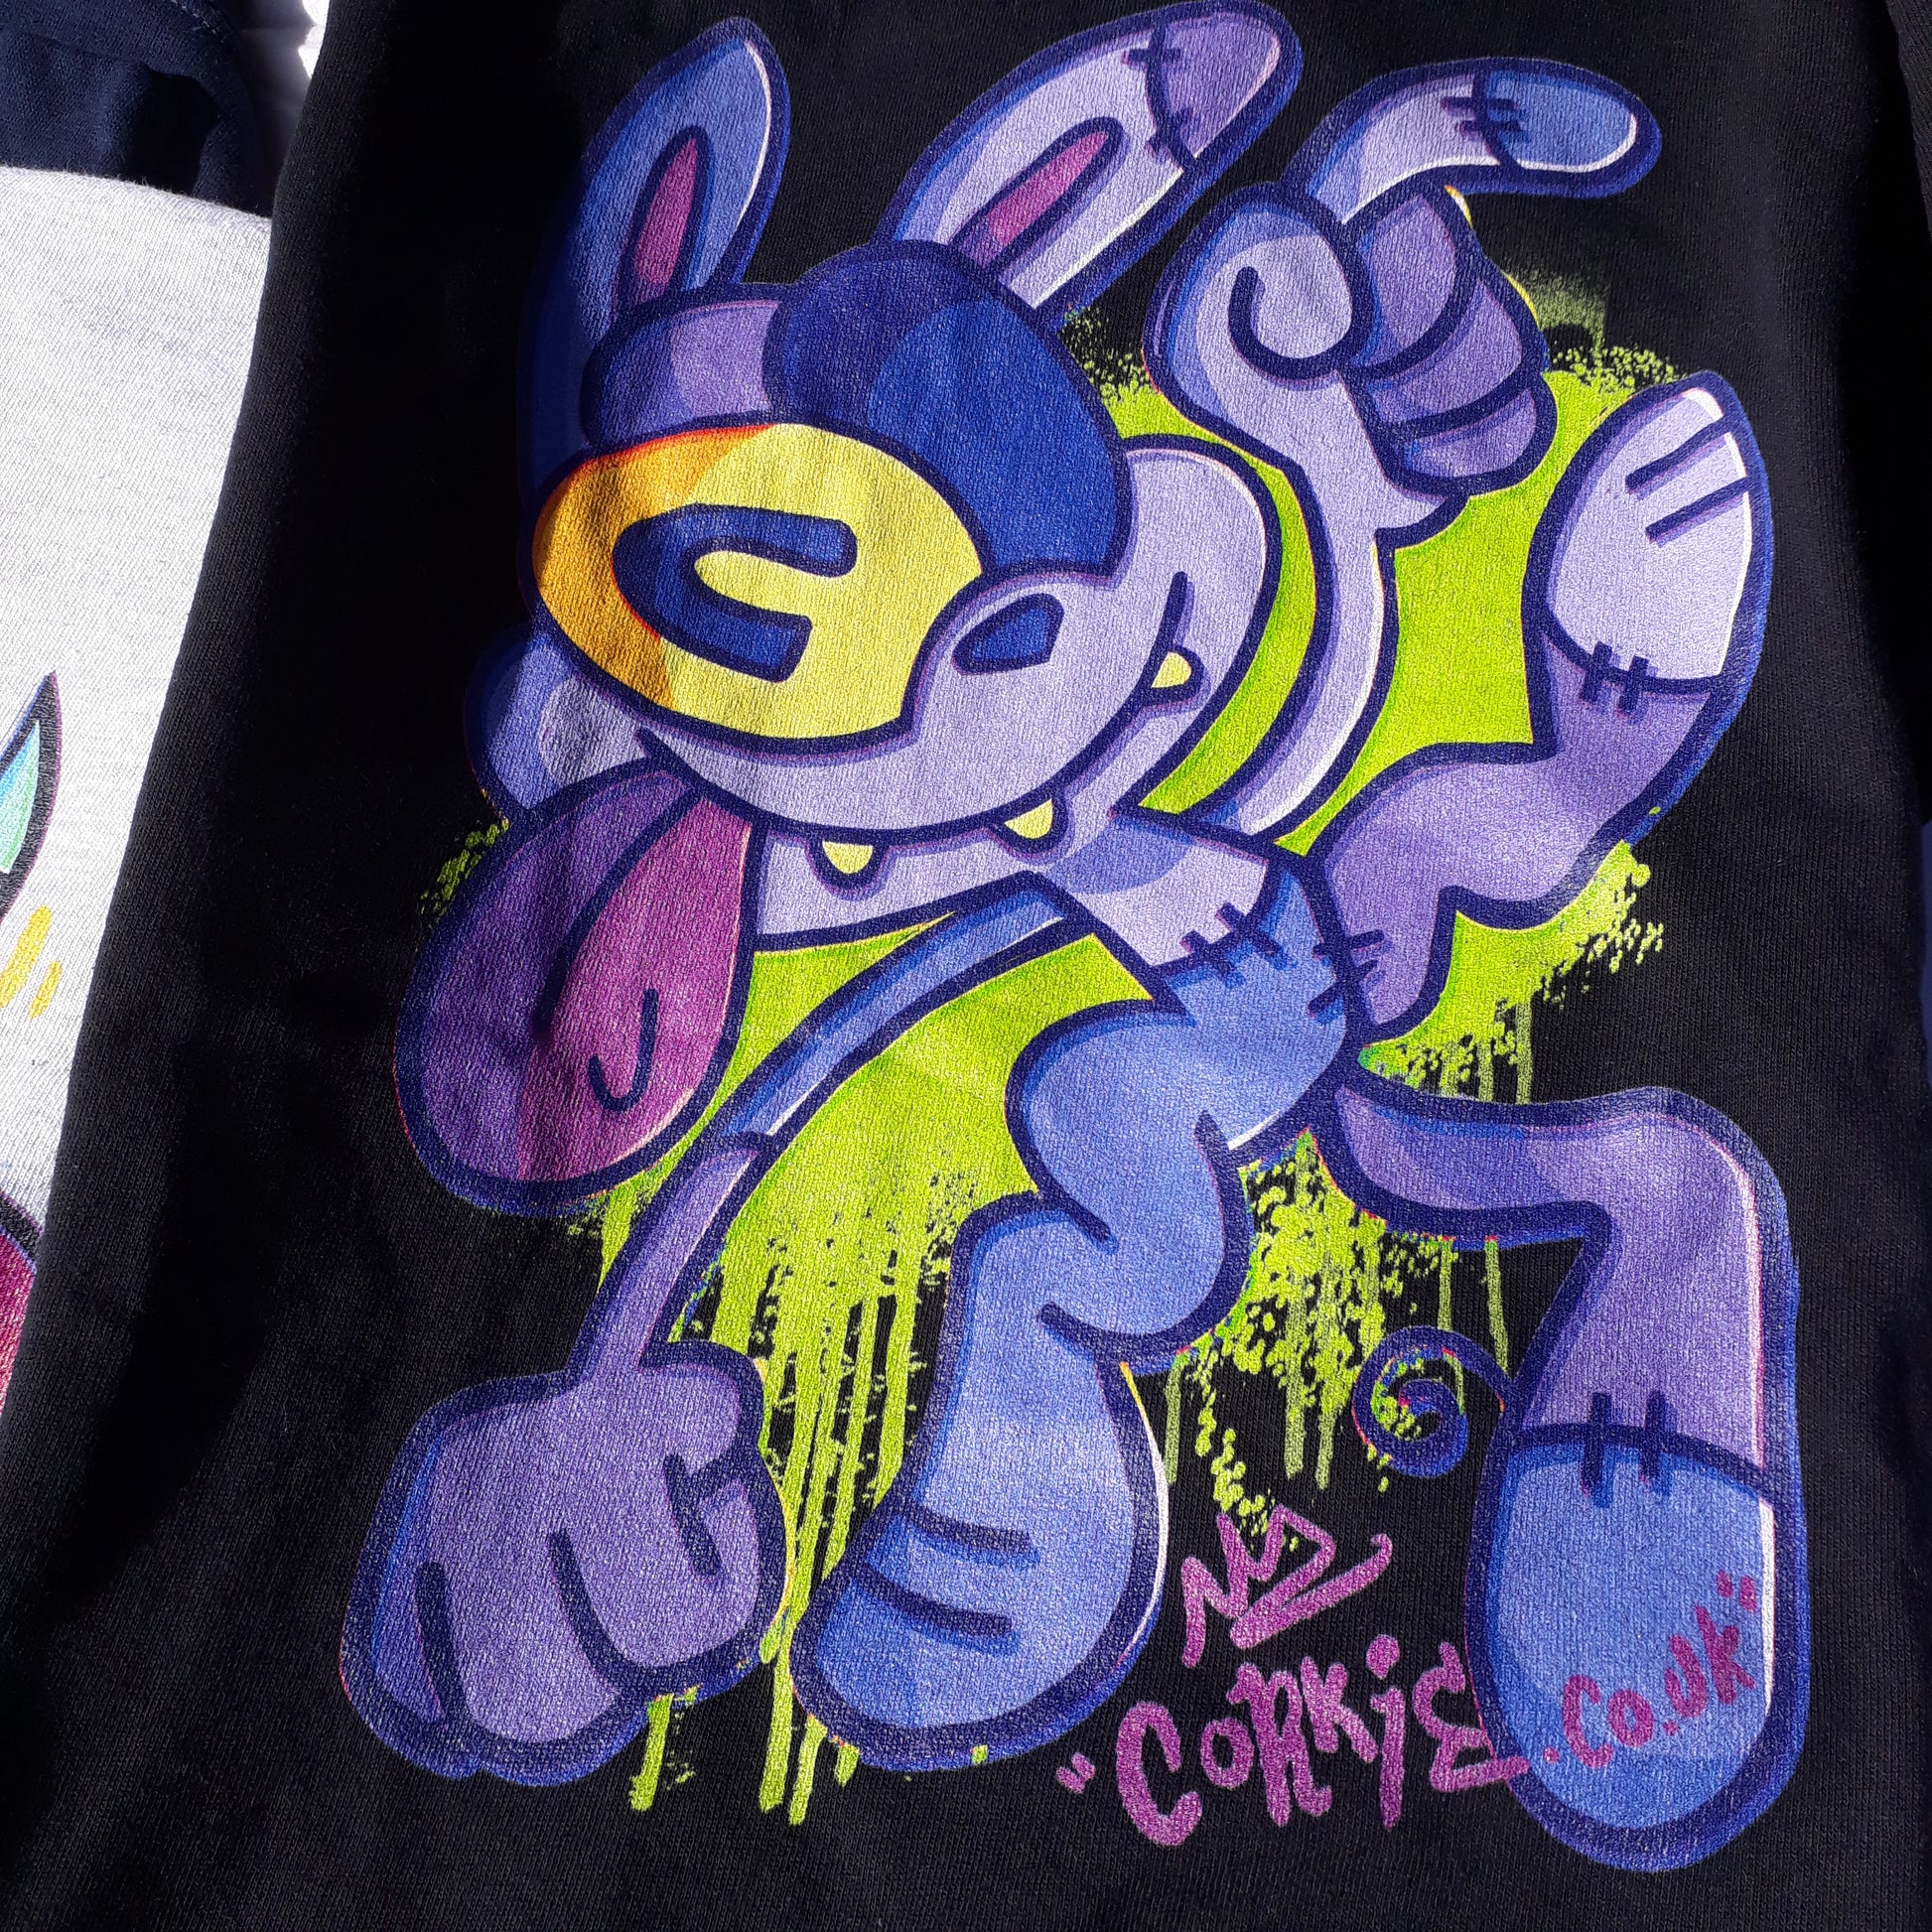 Purple monster graffiti character by streetwear brand CORKiE, printed onto a black shirt with a spray paint effect in the background.